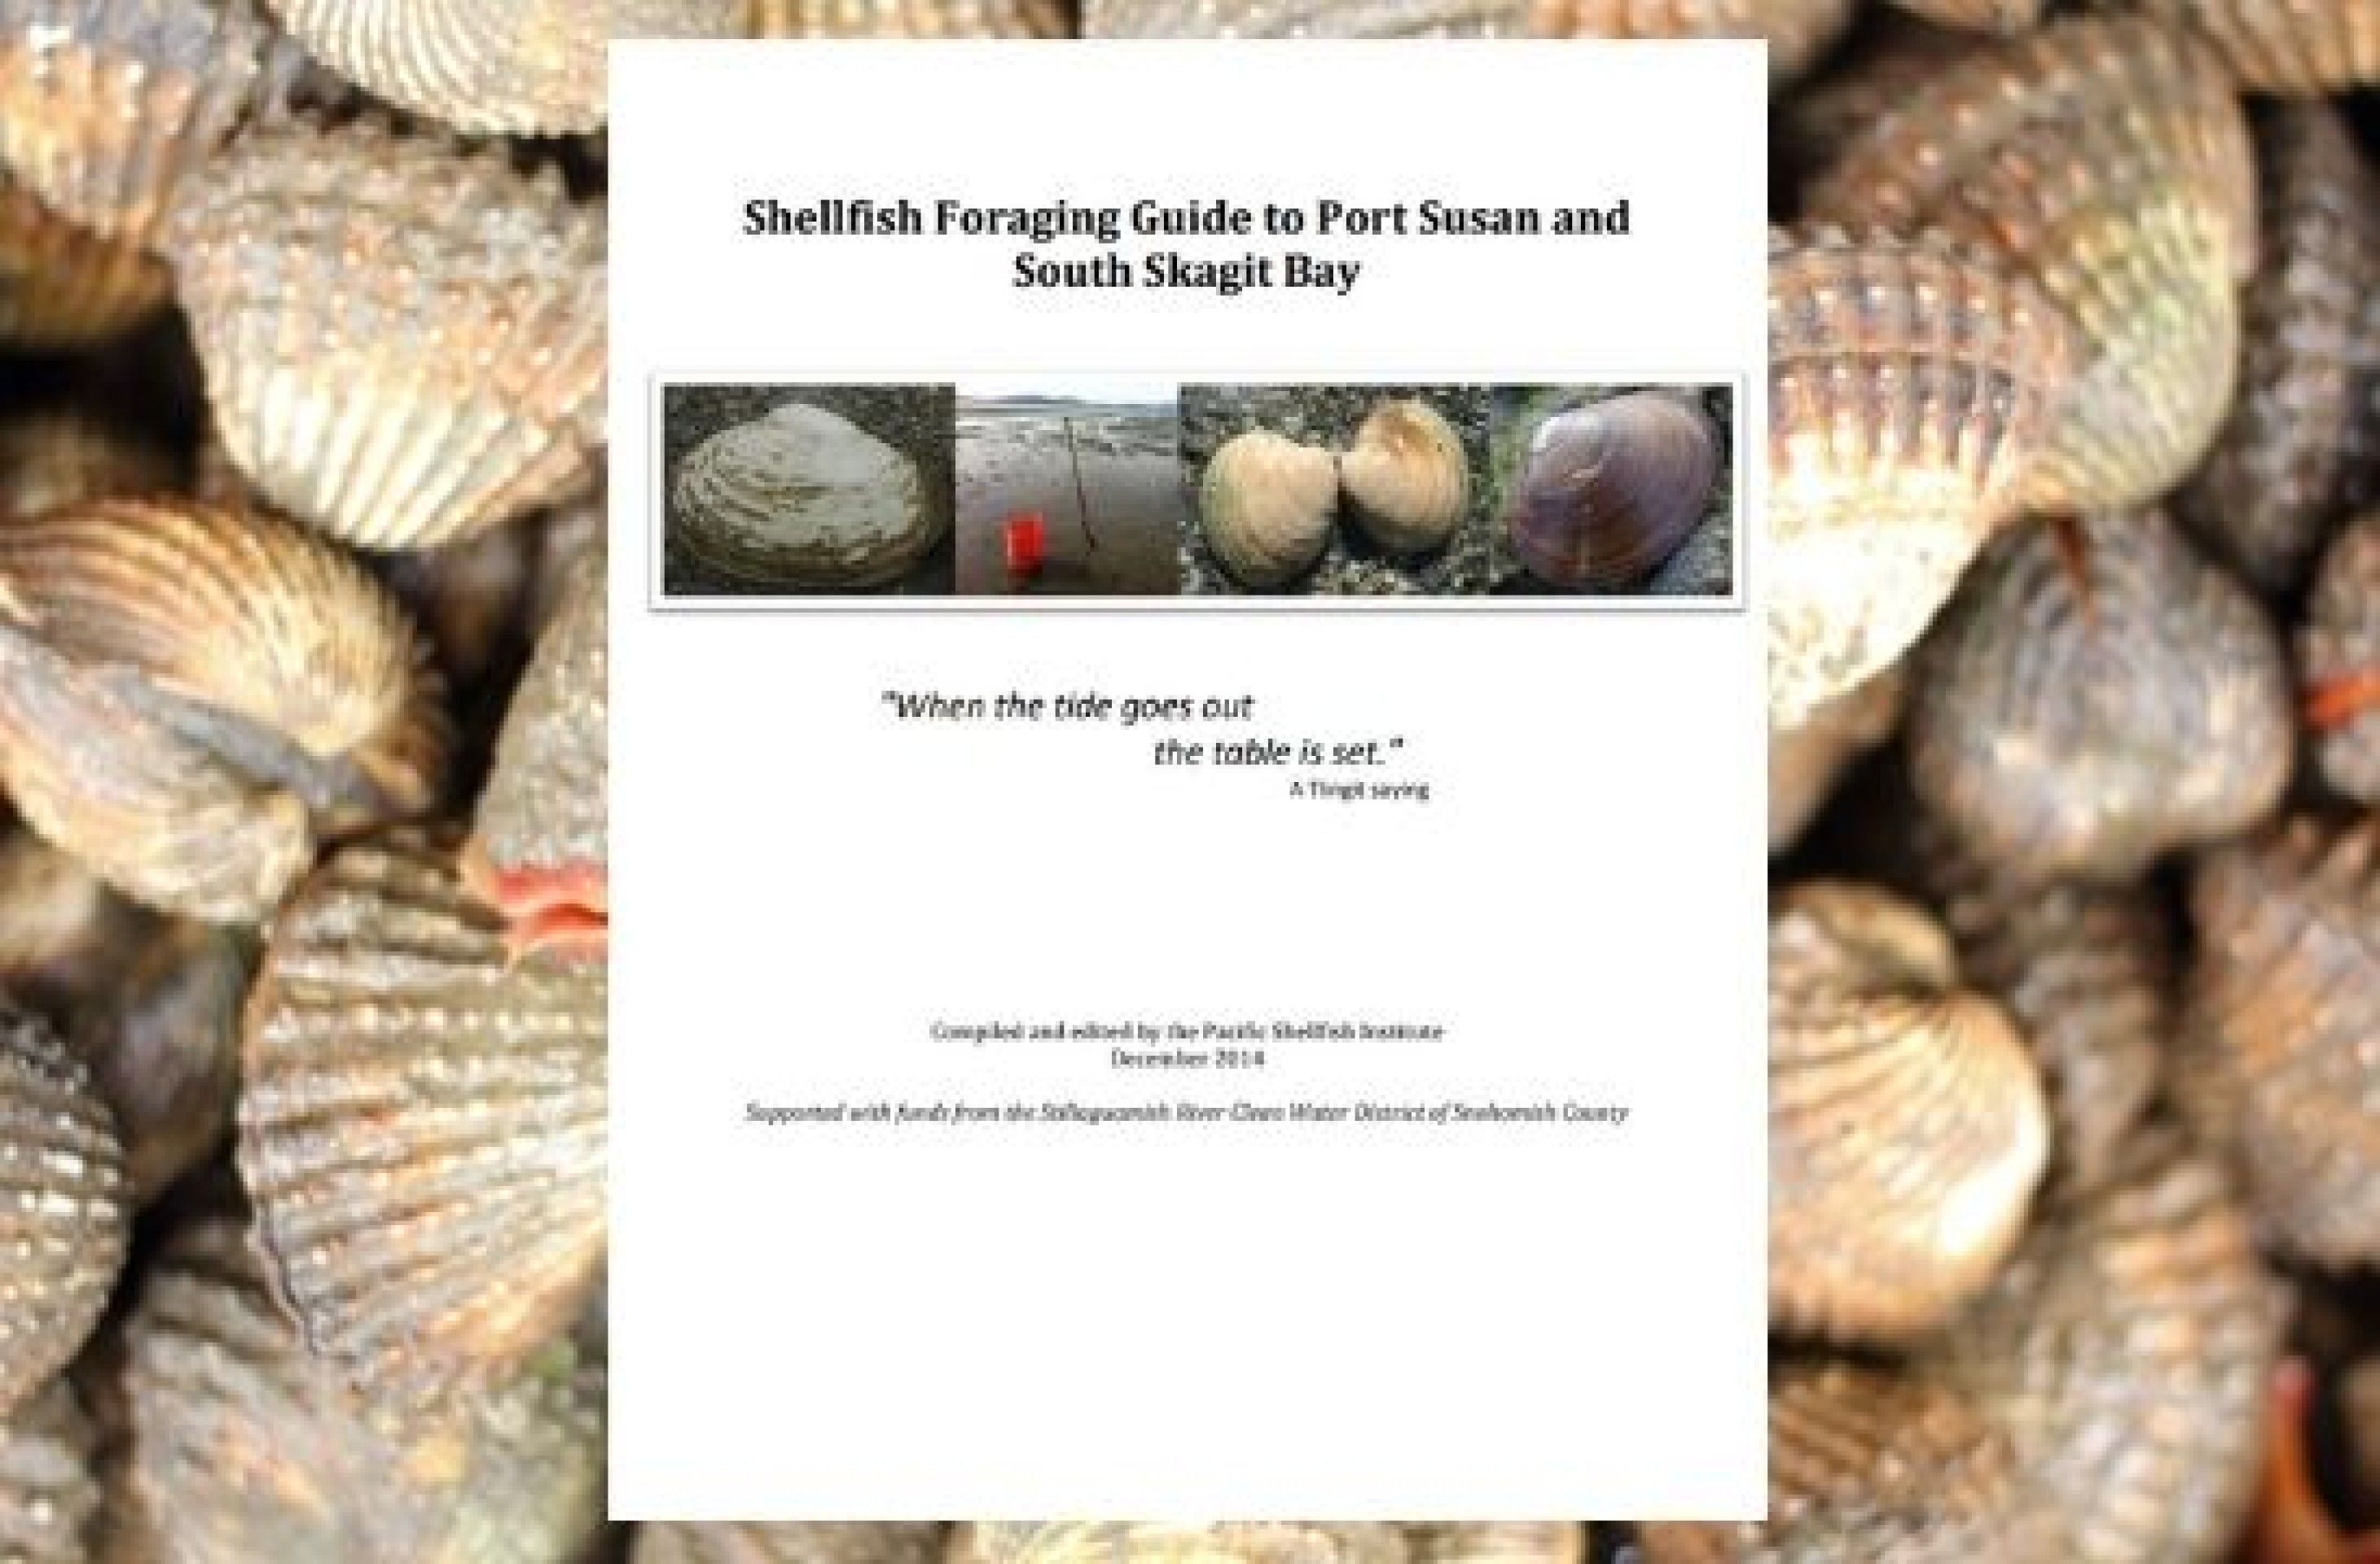 Guide to Shellfish Foraging